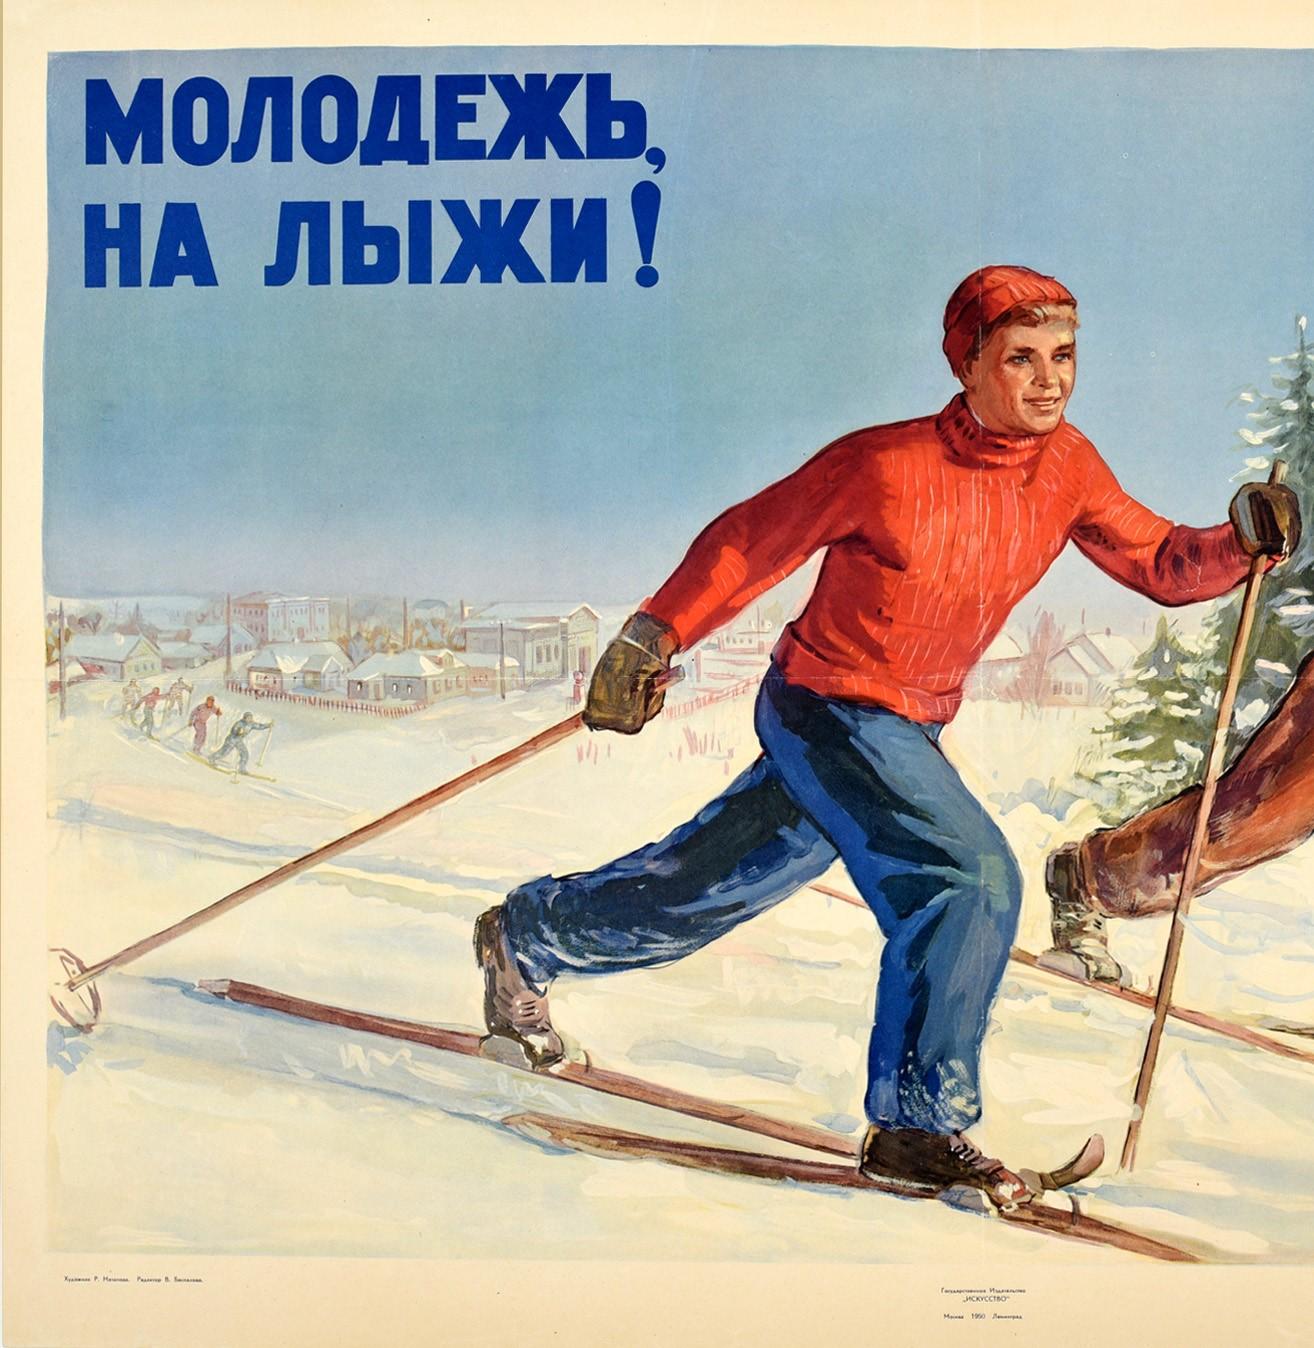 Original vintage Soviet winter sport propaganda poster - Youth, Go Skiing! - featuring a great design depicting two smiling teenagers wearing warm jumpers, gloves and hats, pushing forward with ski poles to go cross country skiing on their wooden